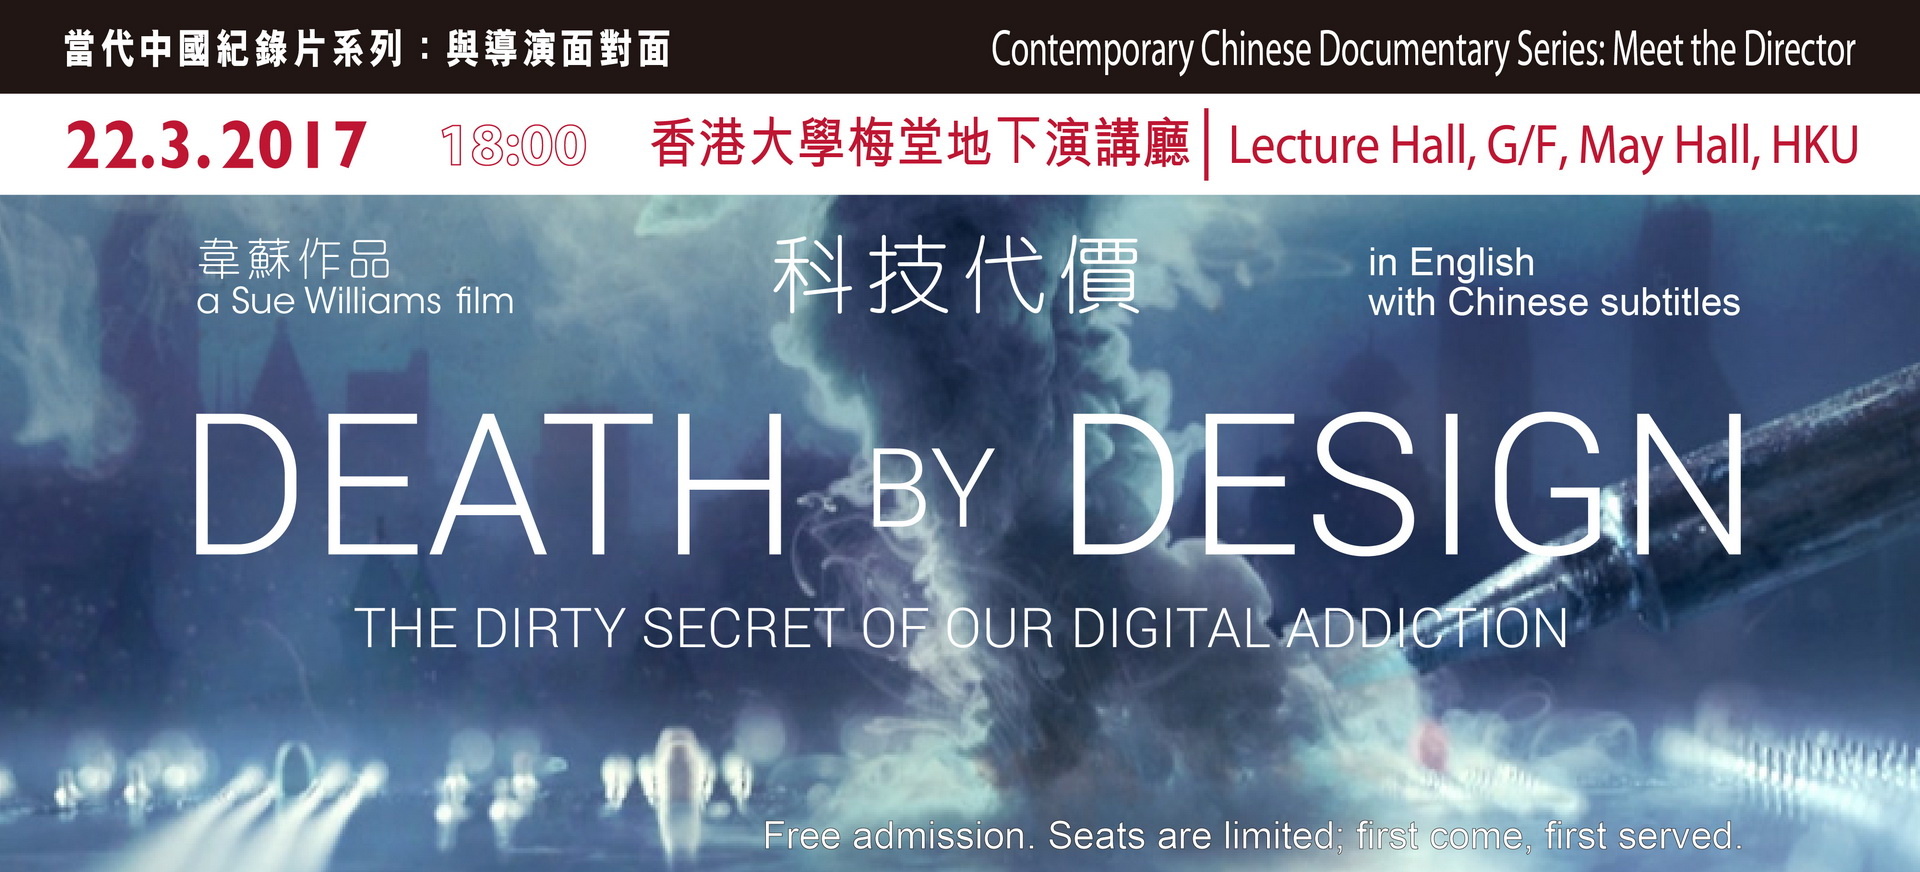 Contemporary Chinese Documentary Series: Meet the Director (22 Mar)